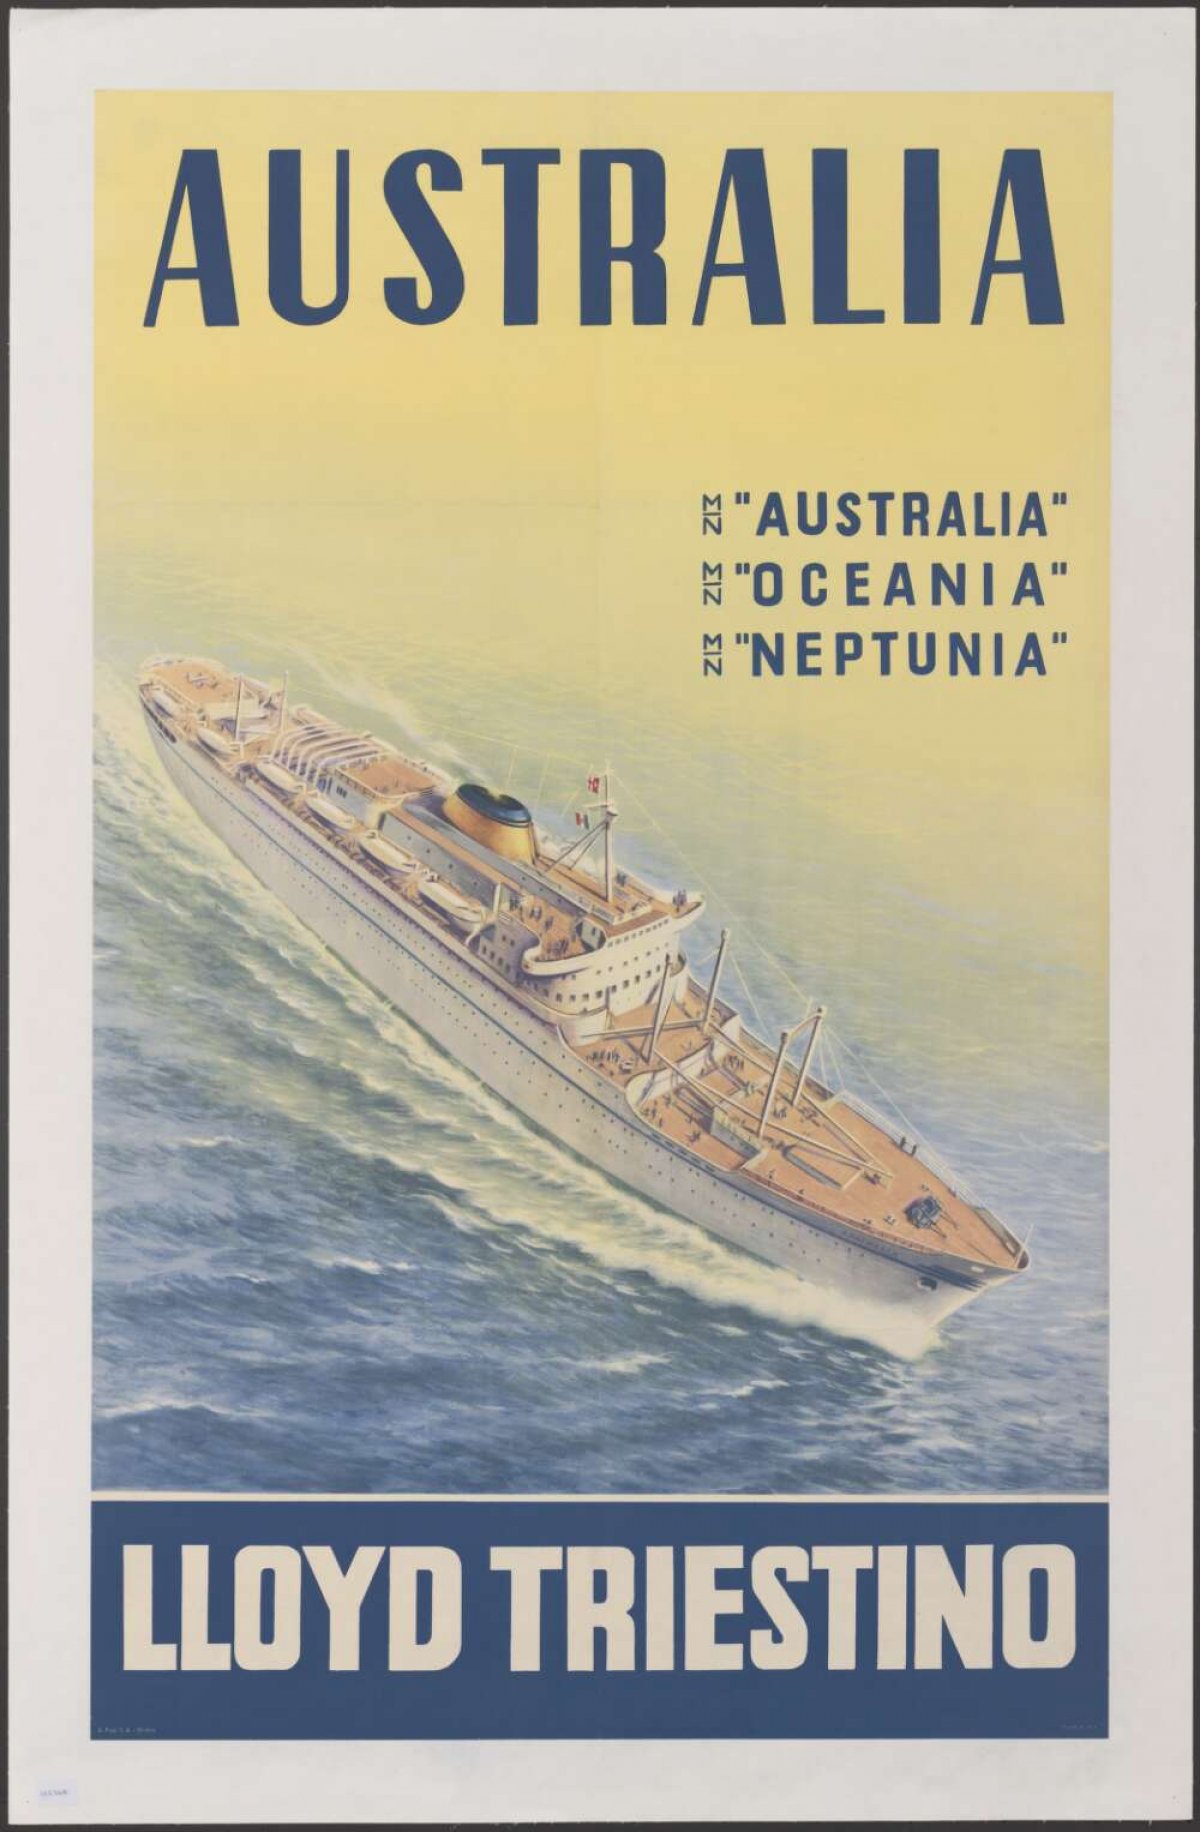 A poster of a ship heading for Australia by Lloyd Triestino